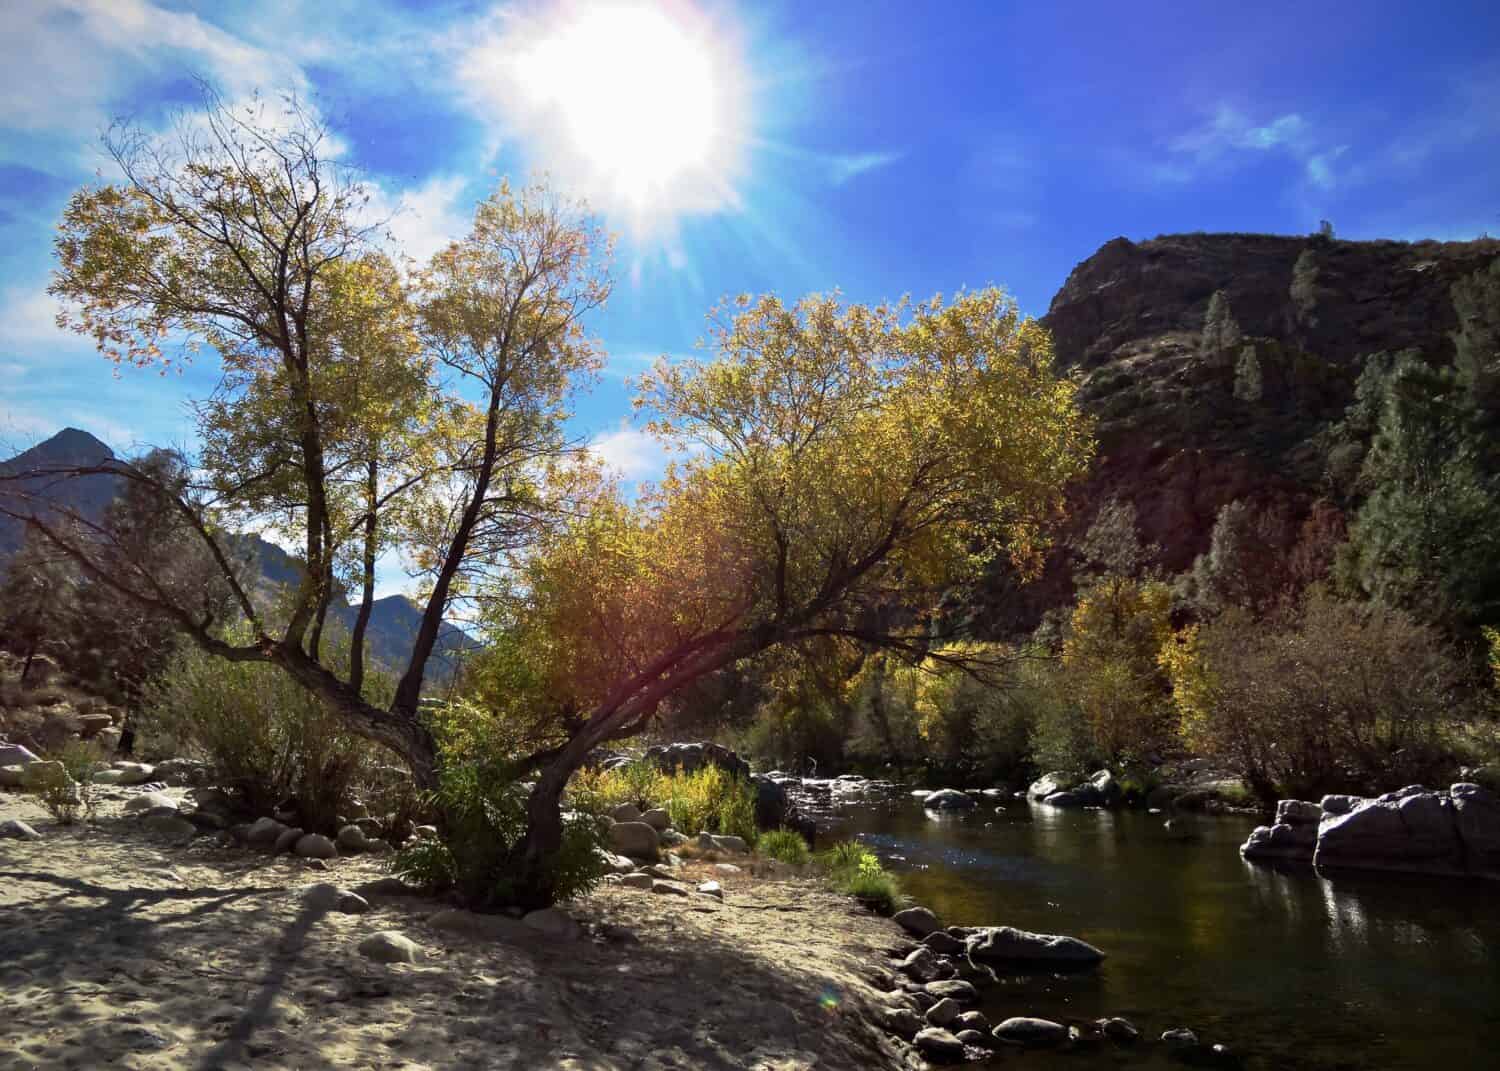 Kern river in Kernville California fall colors on leaves with the sun in the sky and a lens flare tree on beach